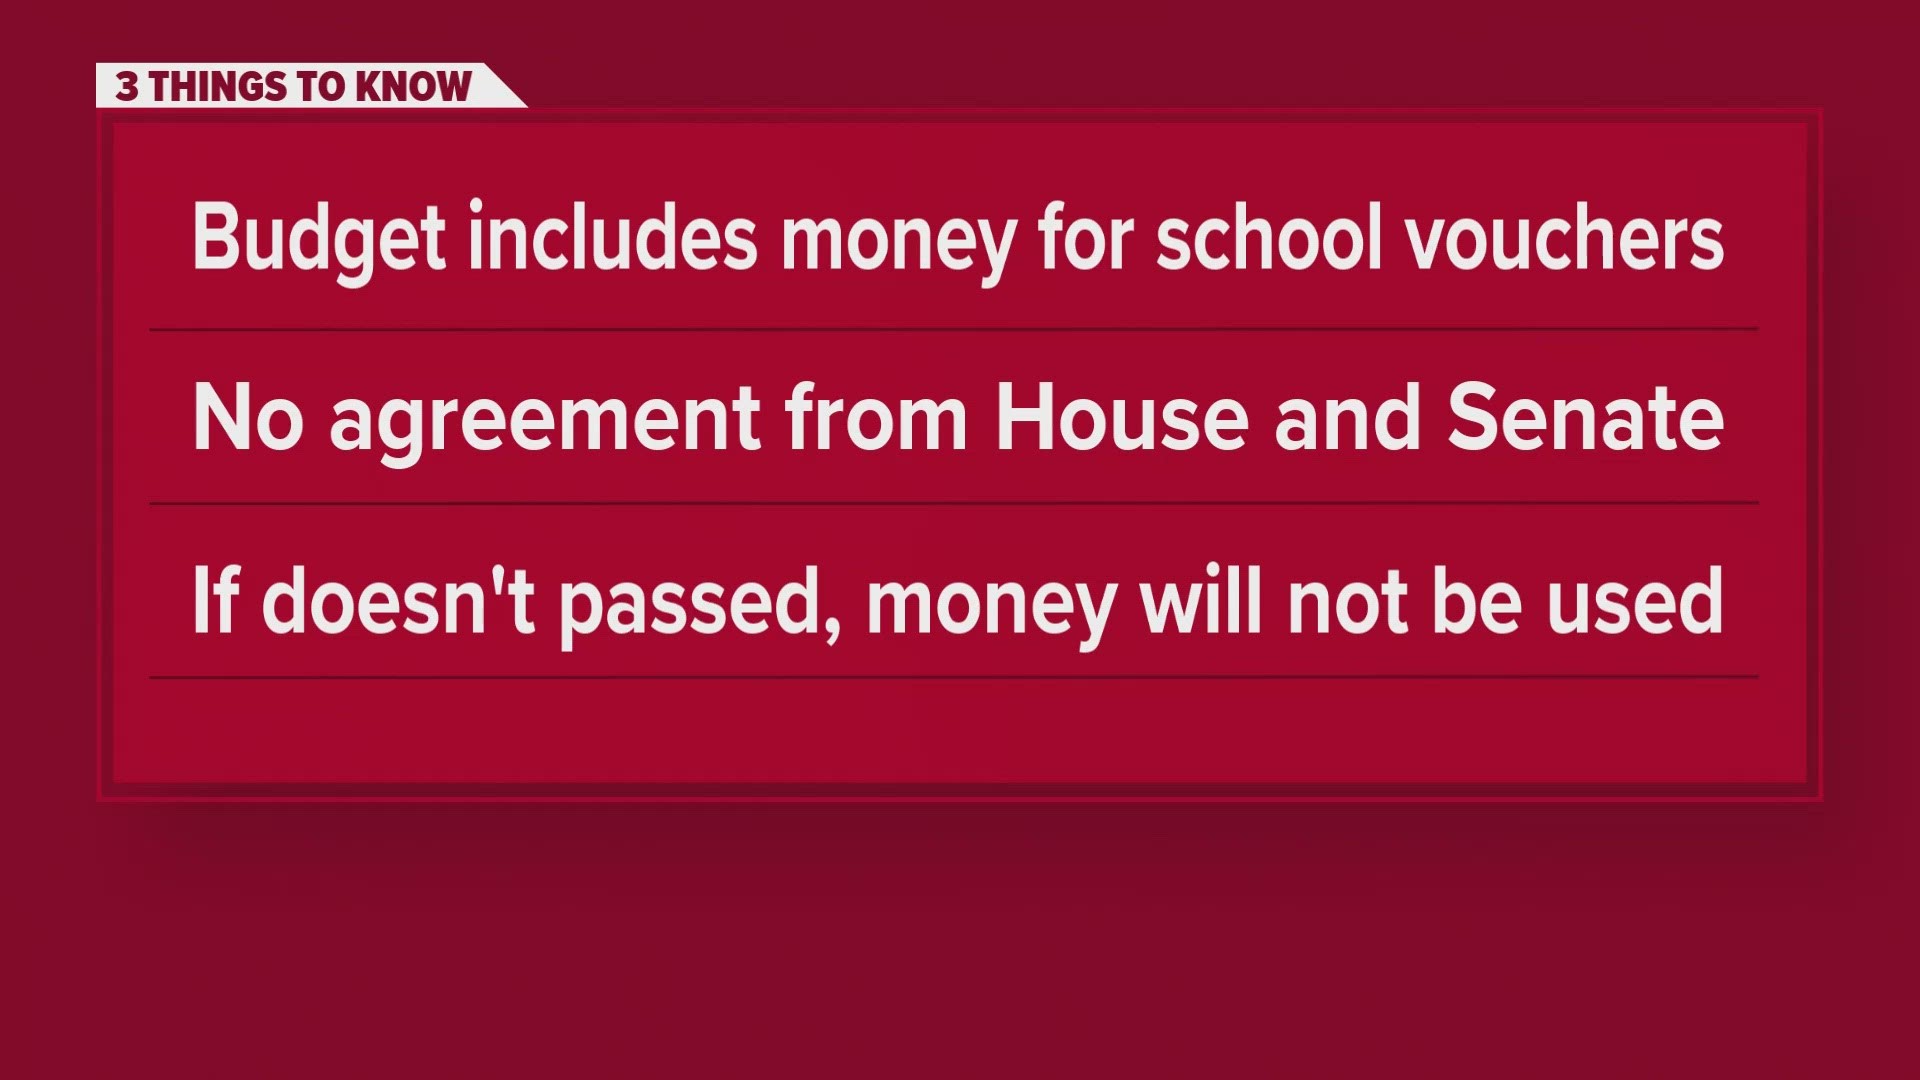 The budget includes money for school vouchers, using public dollars to pay for private school scholarships.